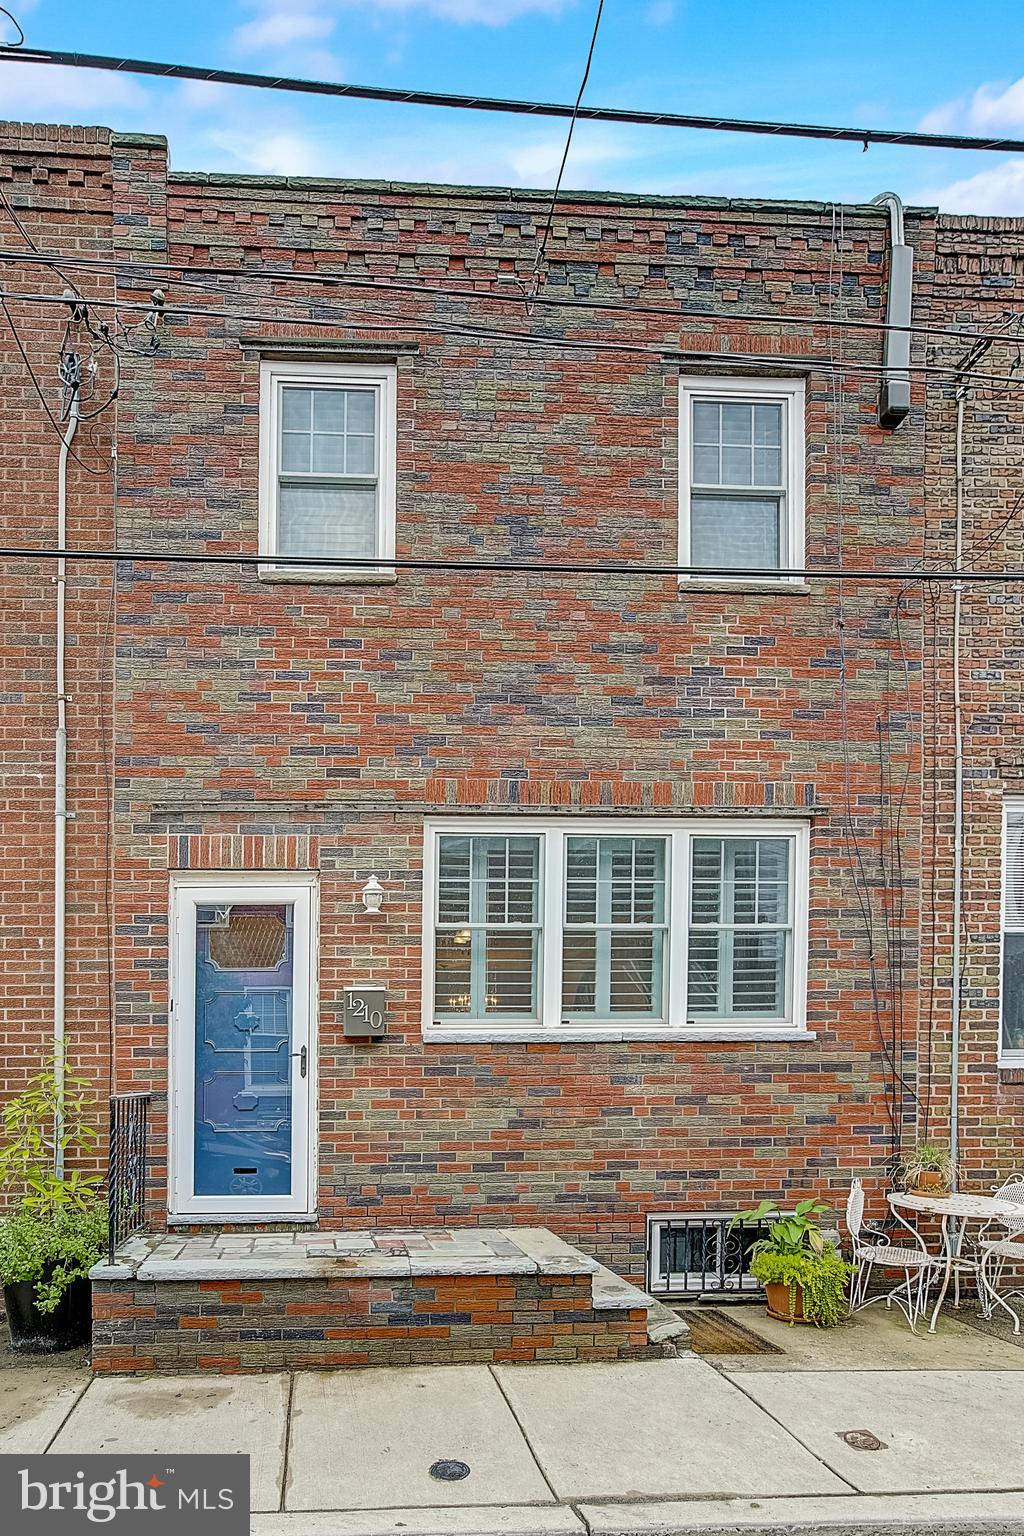 a brick building with a window